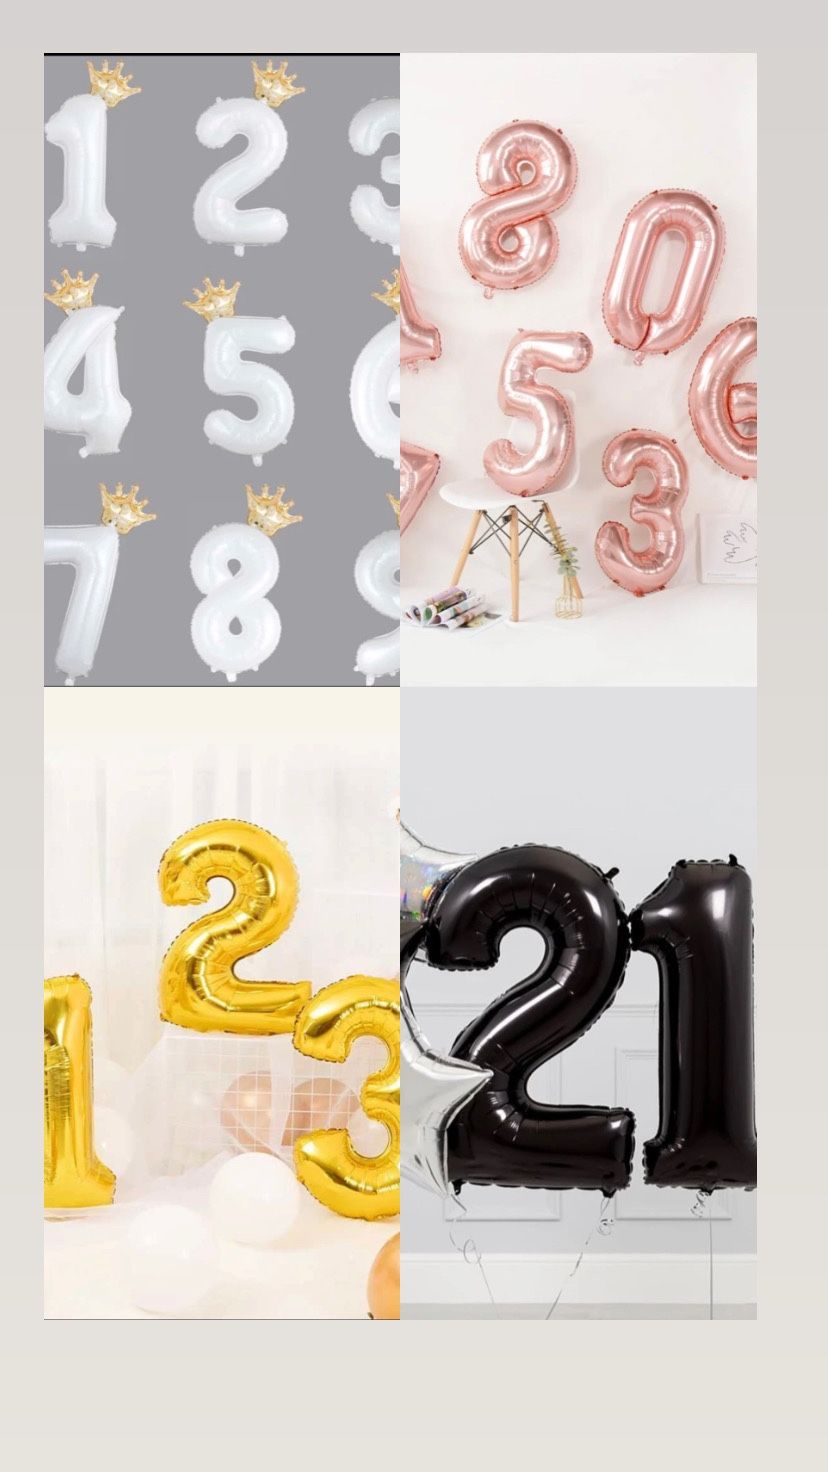 Number Party Balloons -$3 